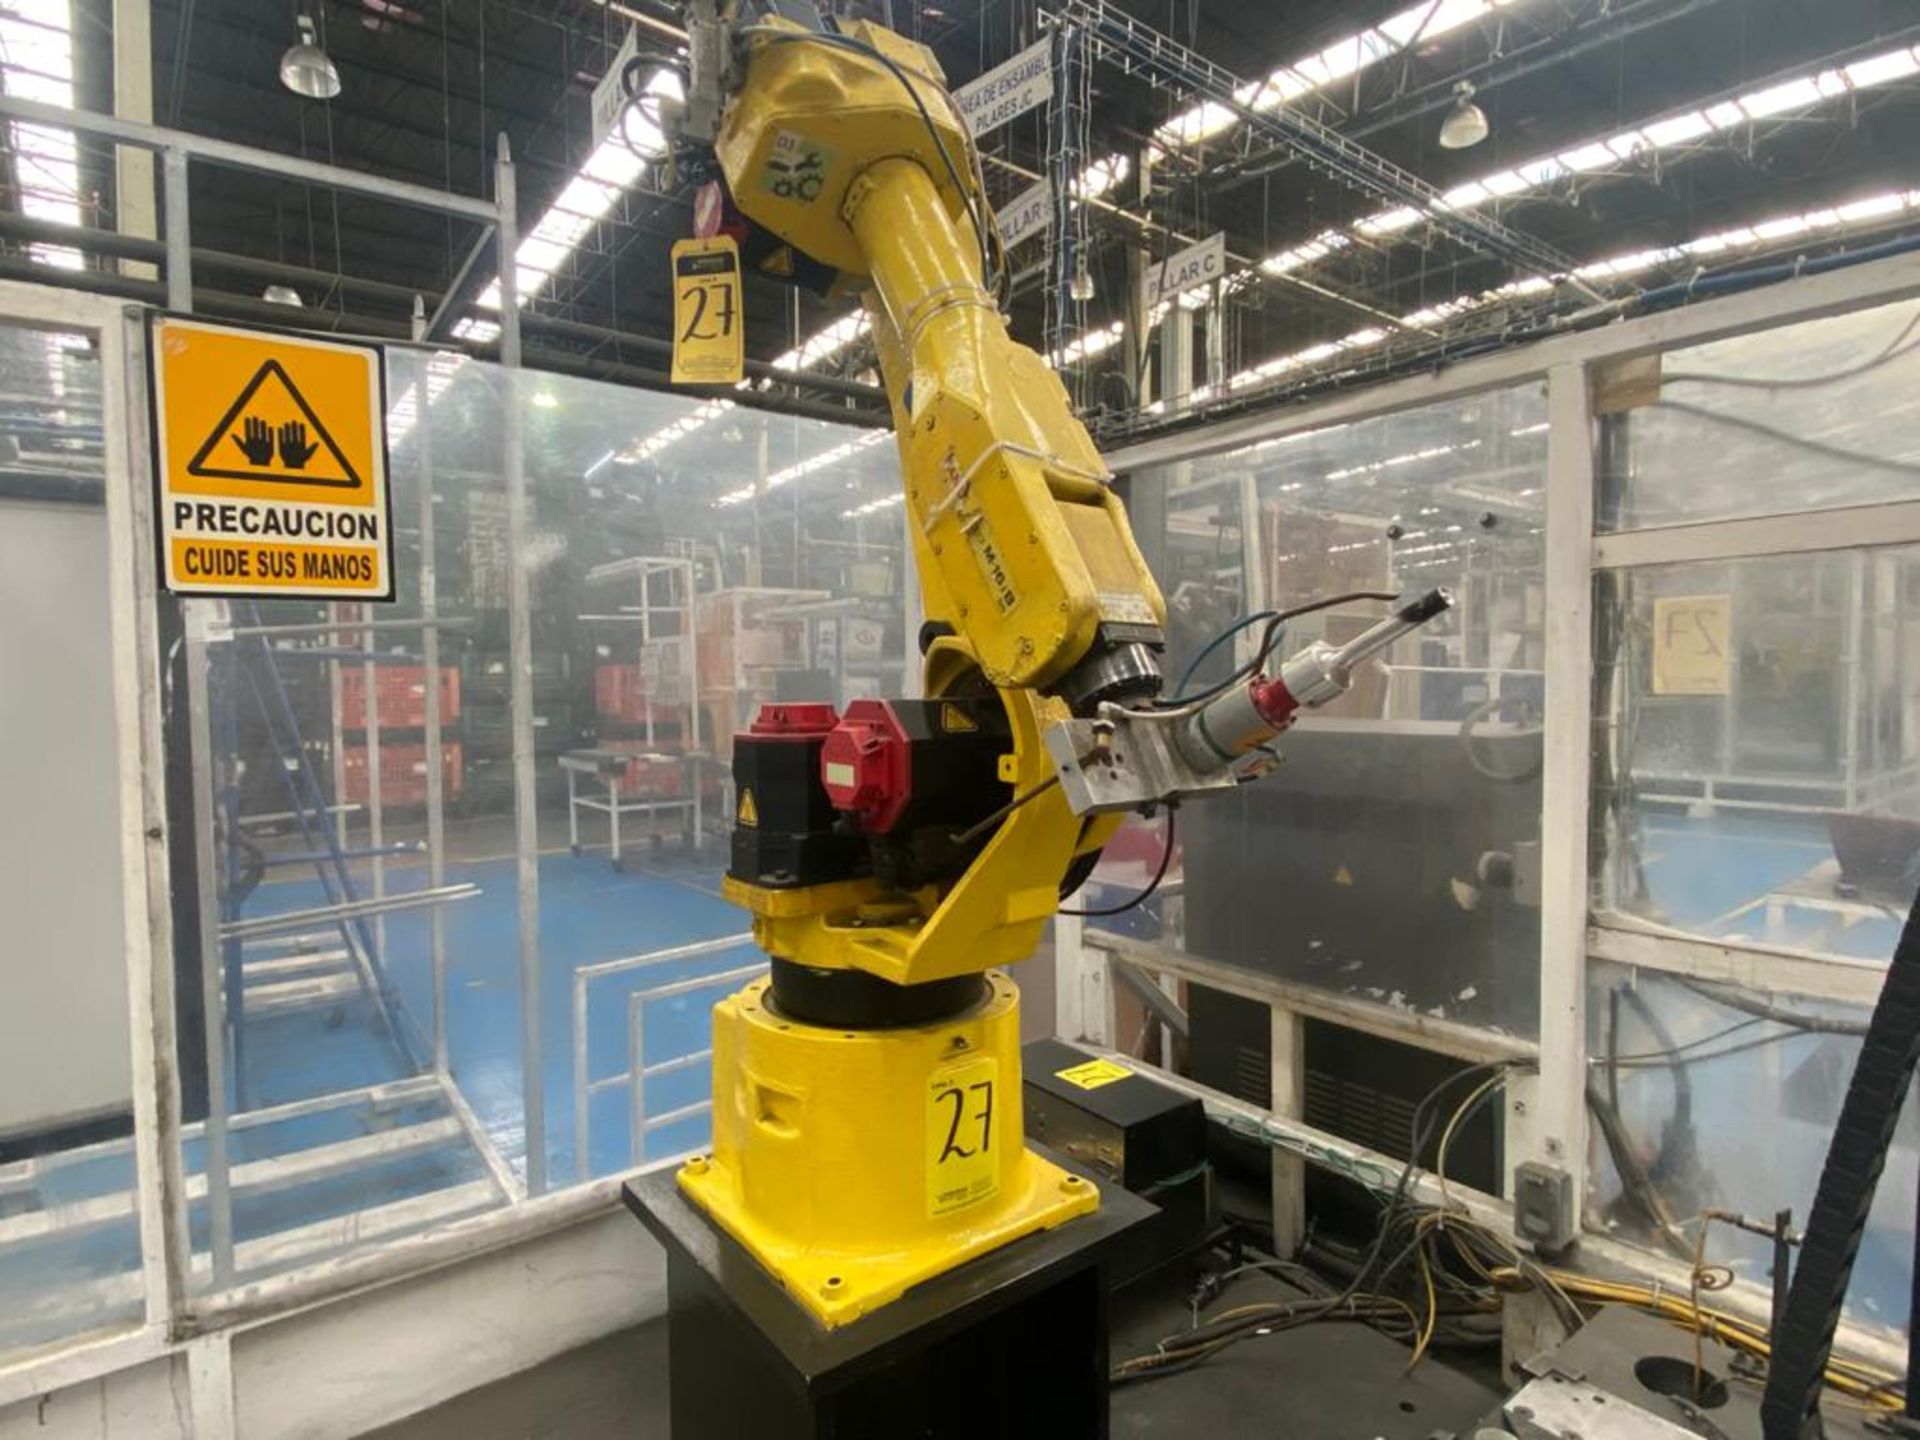 Welding cell in steel square profile structure, equipped with Fanuc articulated Robot, - Image 15 of 53